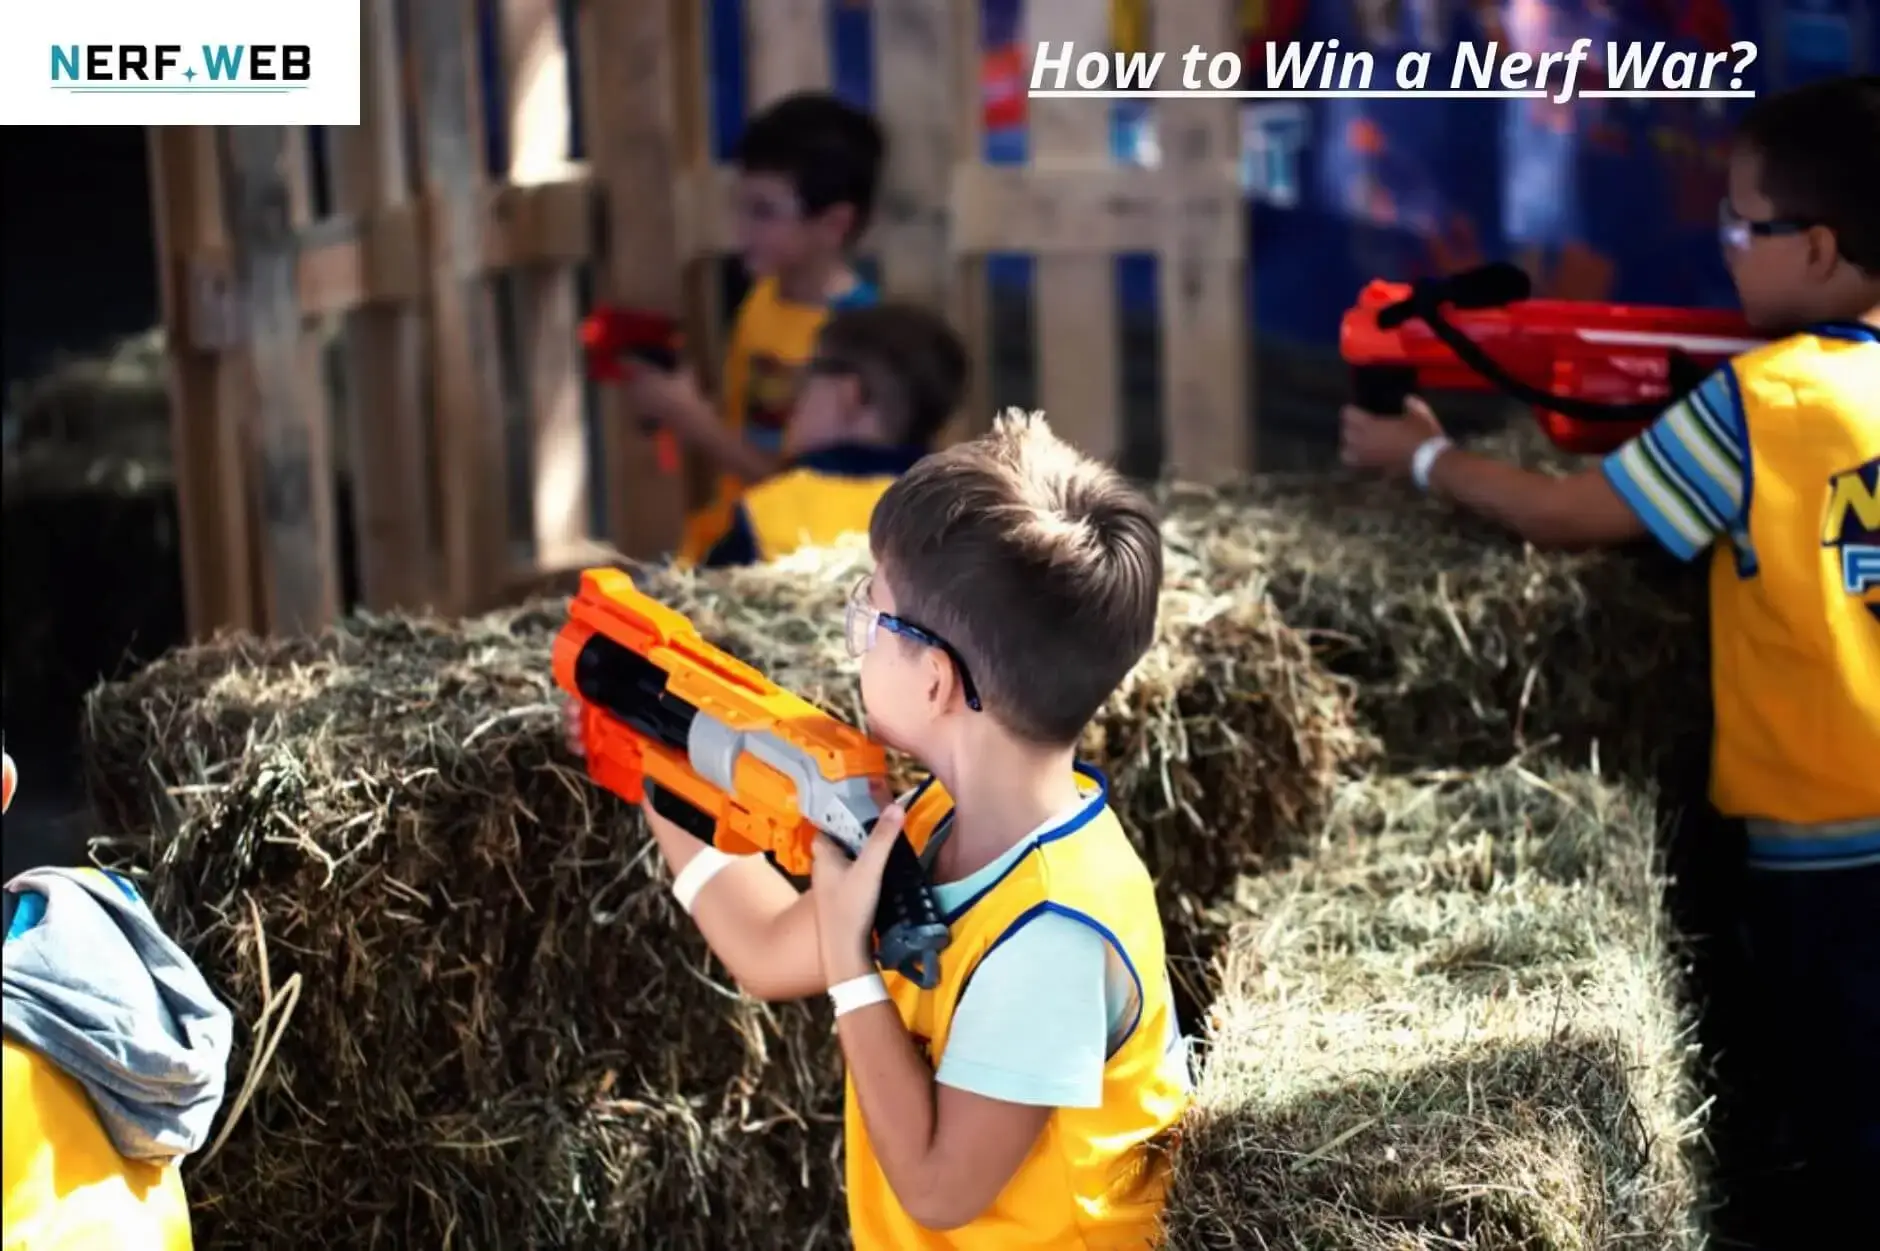 How to Win a Nerf War